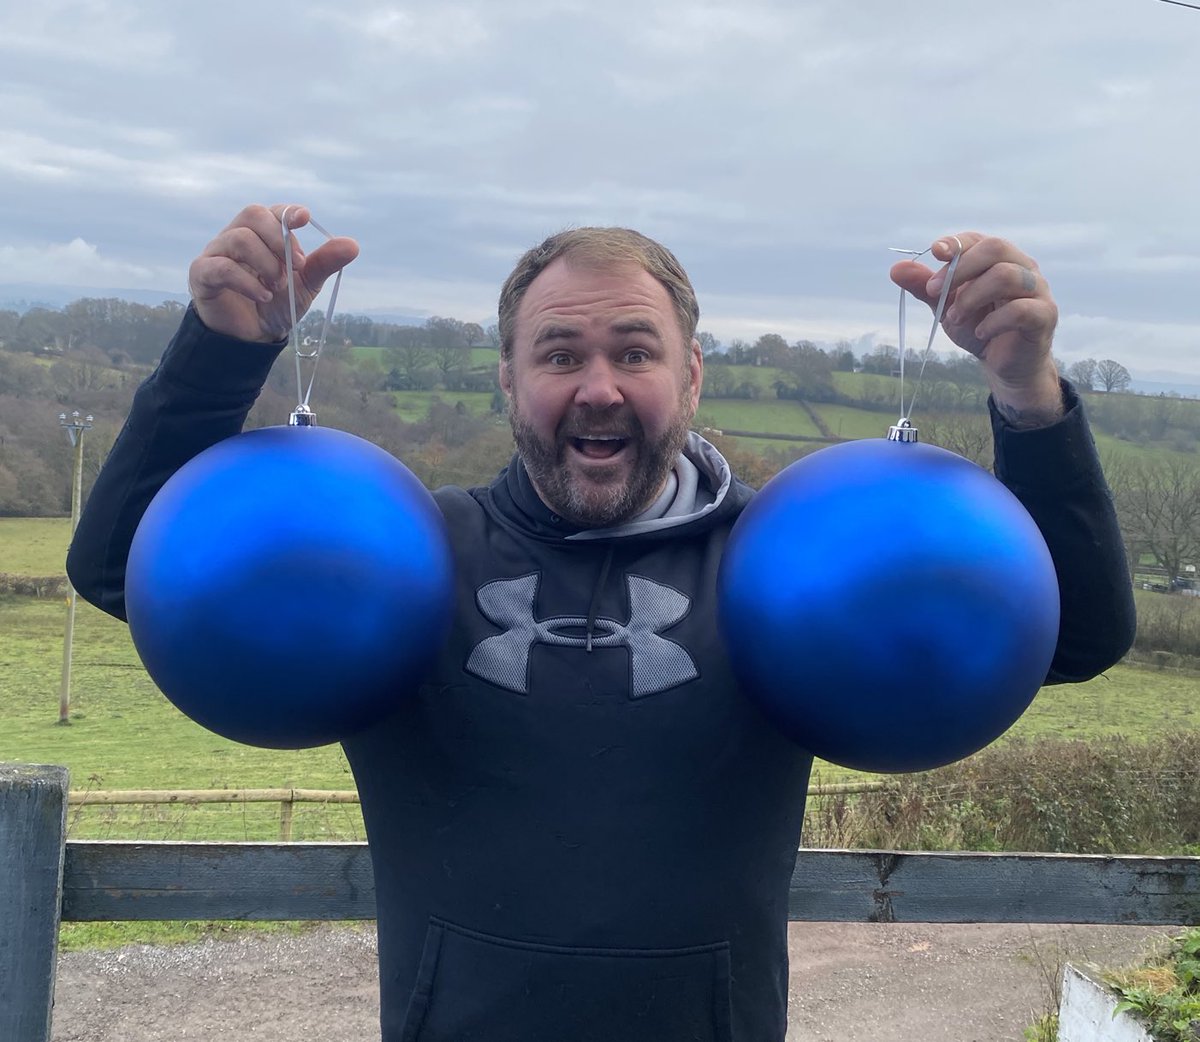 April is Testicular Cancer Awareness month! This is a reminder to... #CheckYourBalls @myoddballs Now it’s your turn ⁦@MikeBubbins⁩ ⁦@SteveSpeirs4⁩